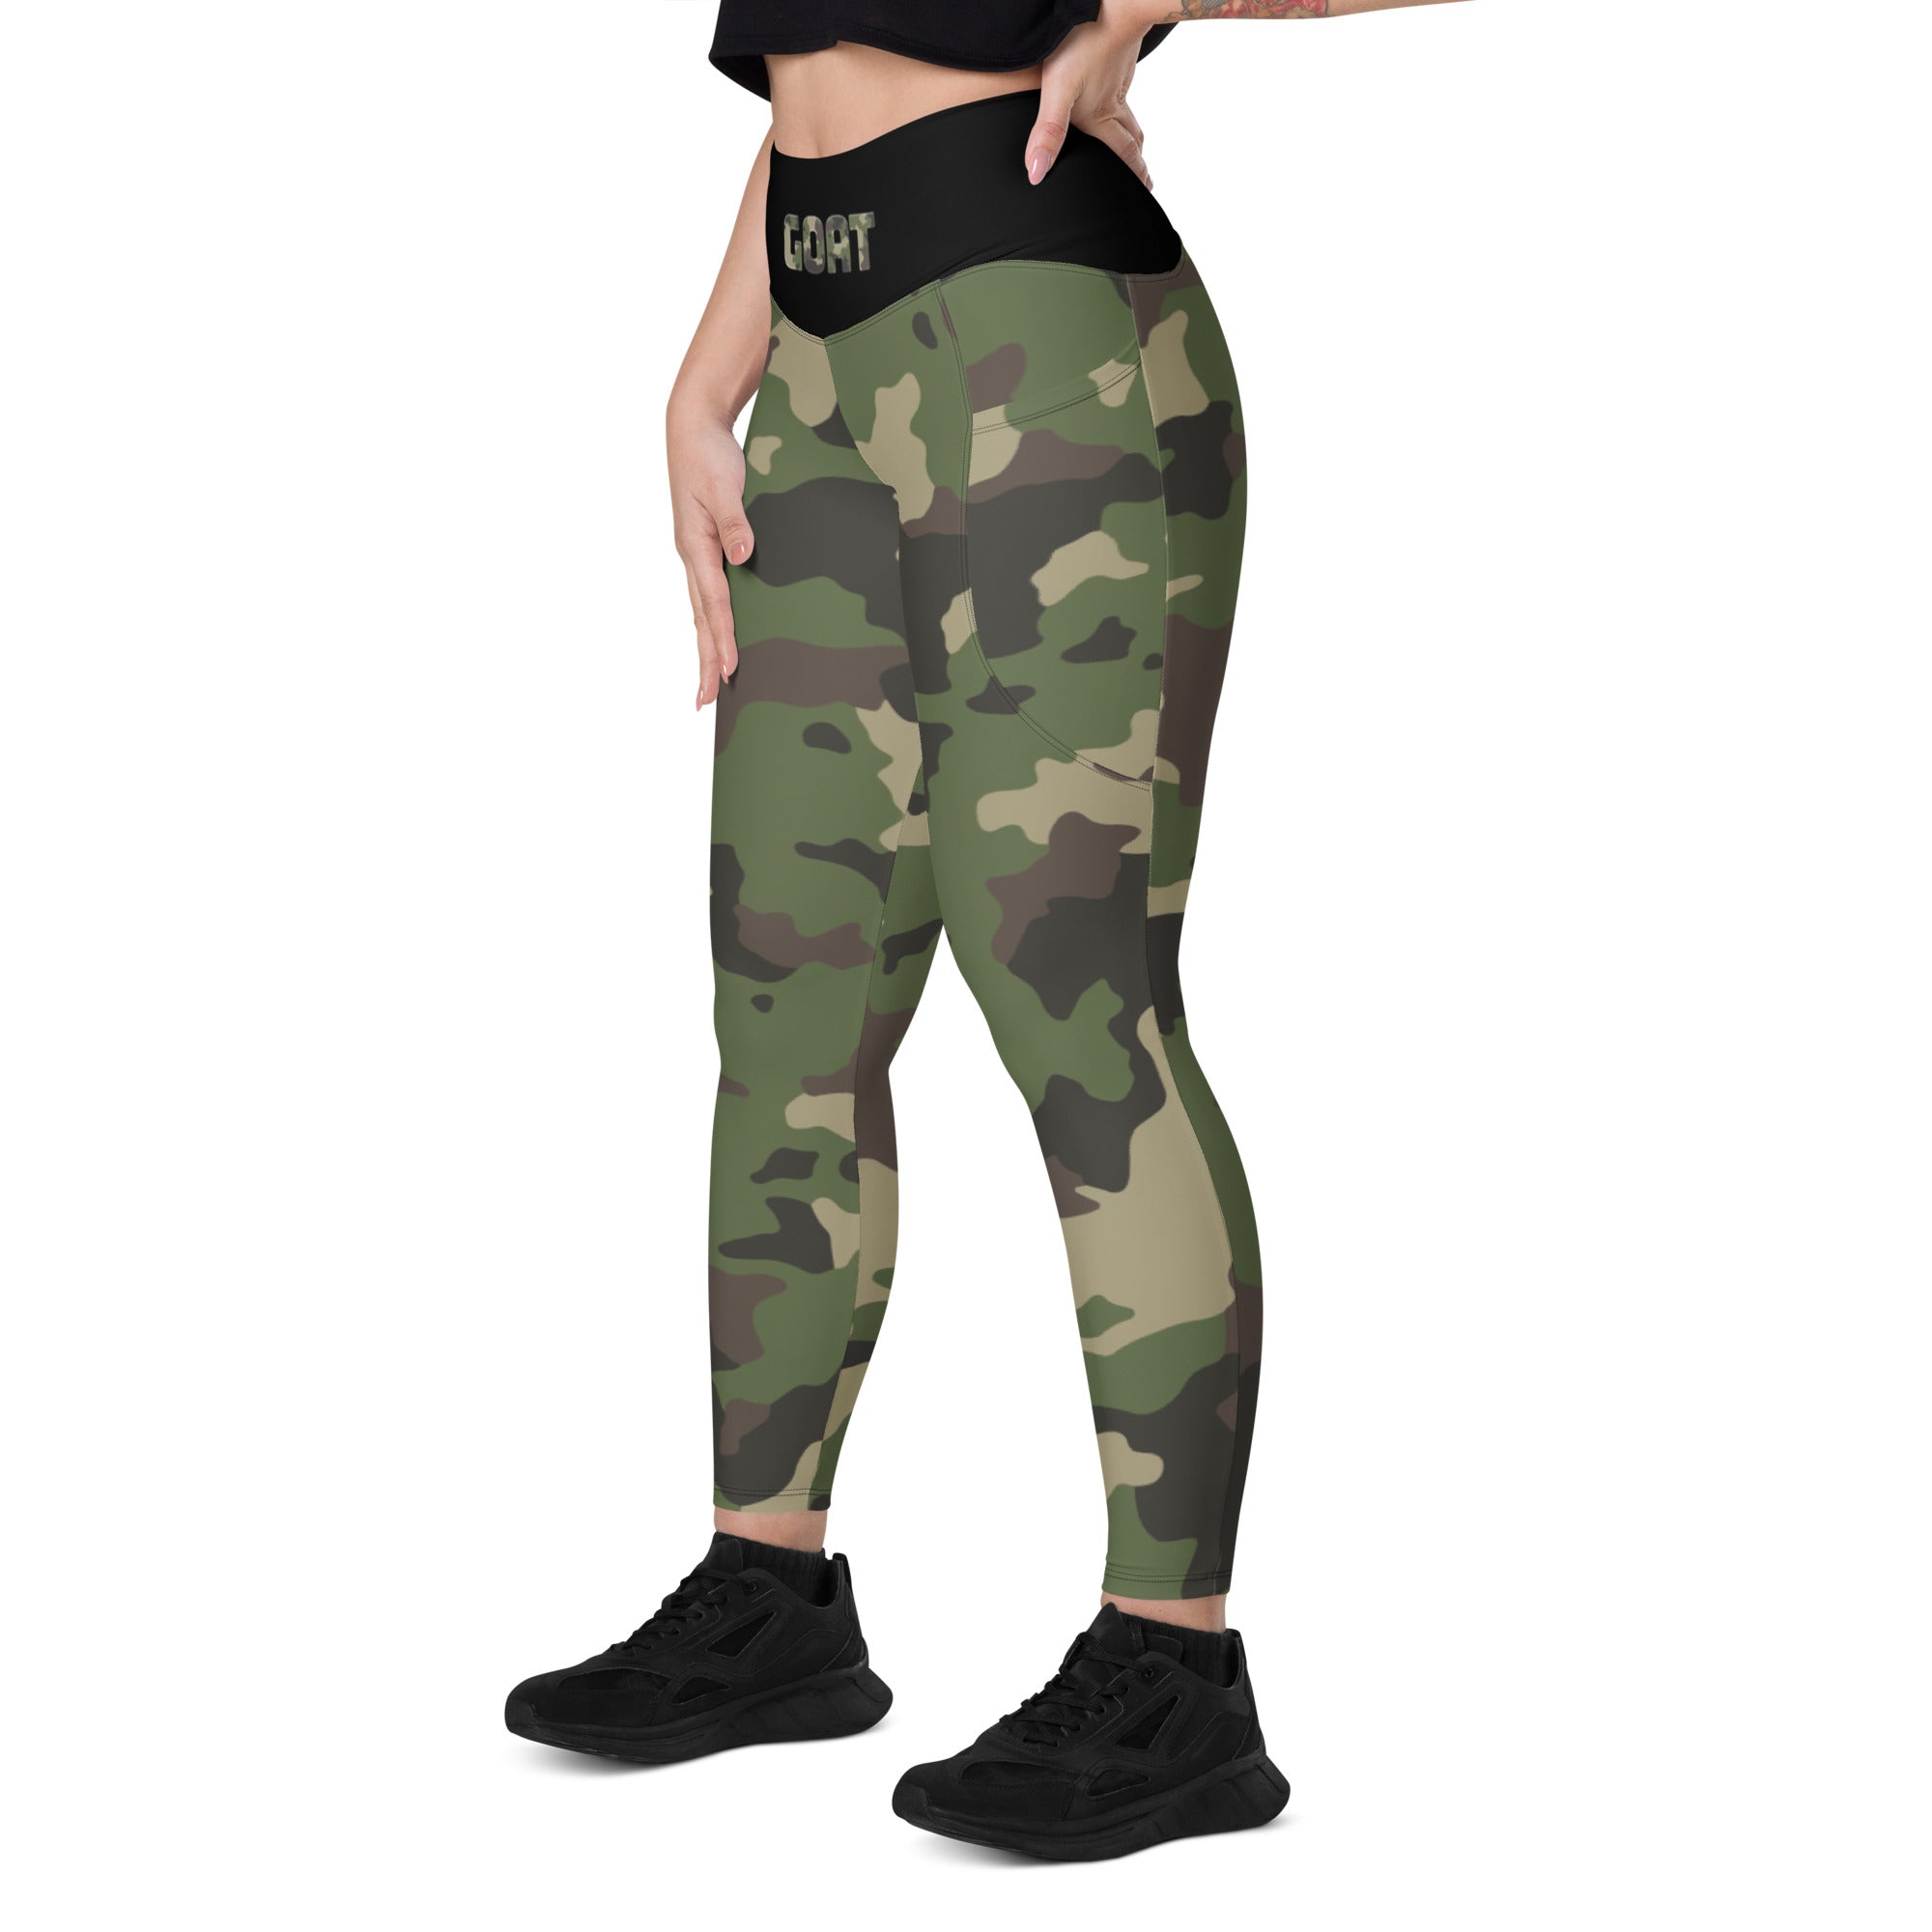 Camo Printed Leggings Women Sports Apparel Fitness Military Activewear  Shaping Sportswear Camouflage Green Brown Gym Gear Yoga Pants Tight - Etsy